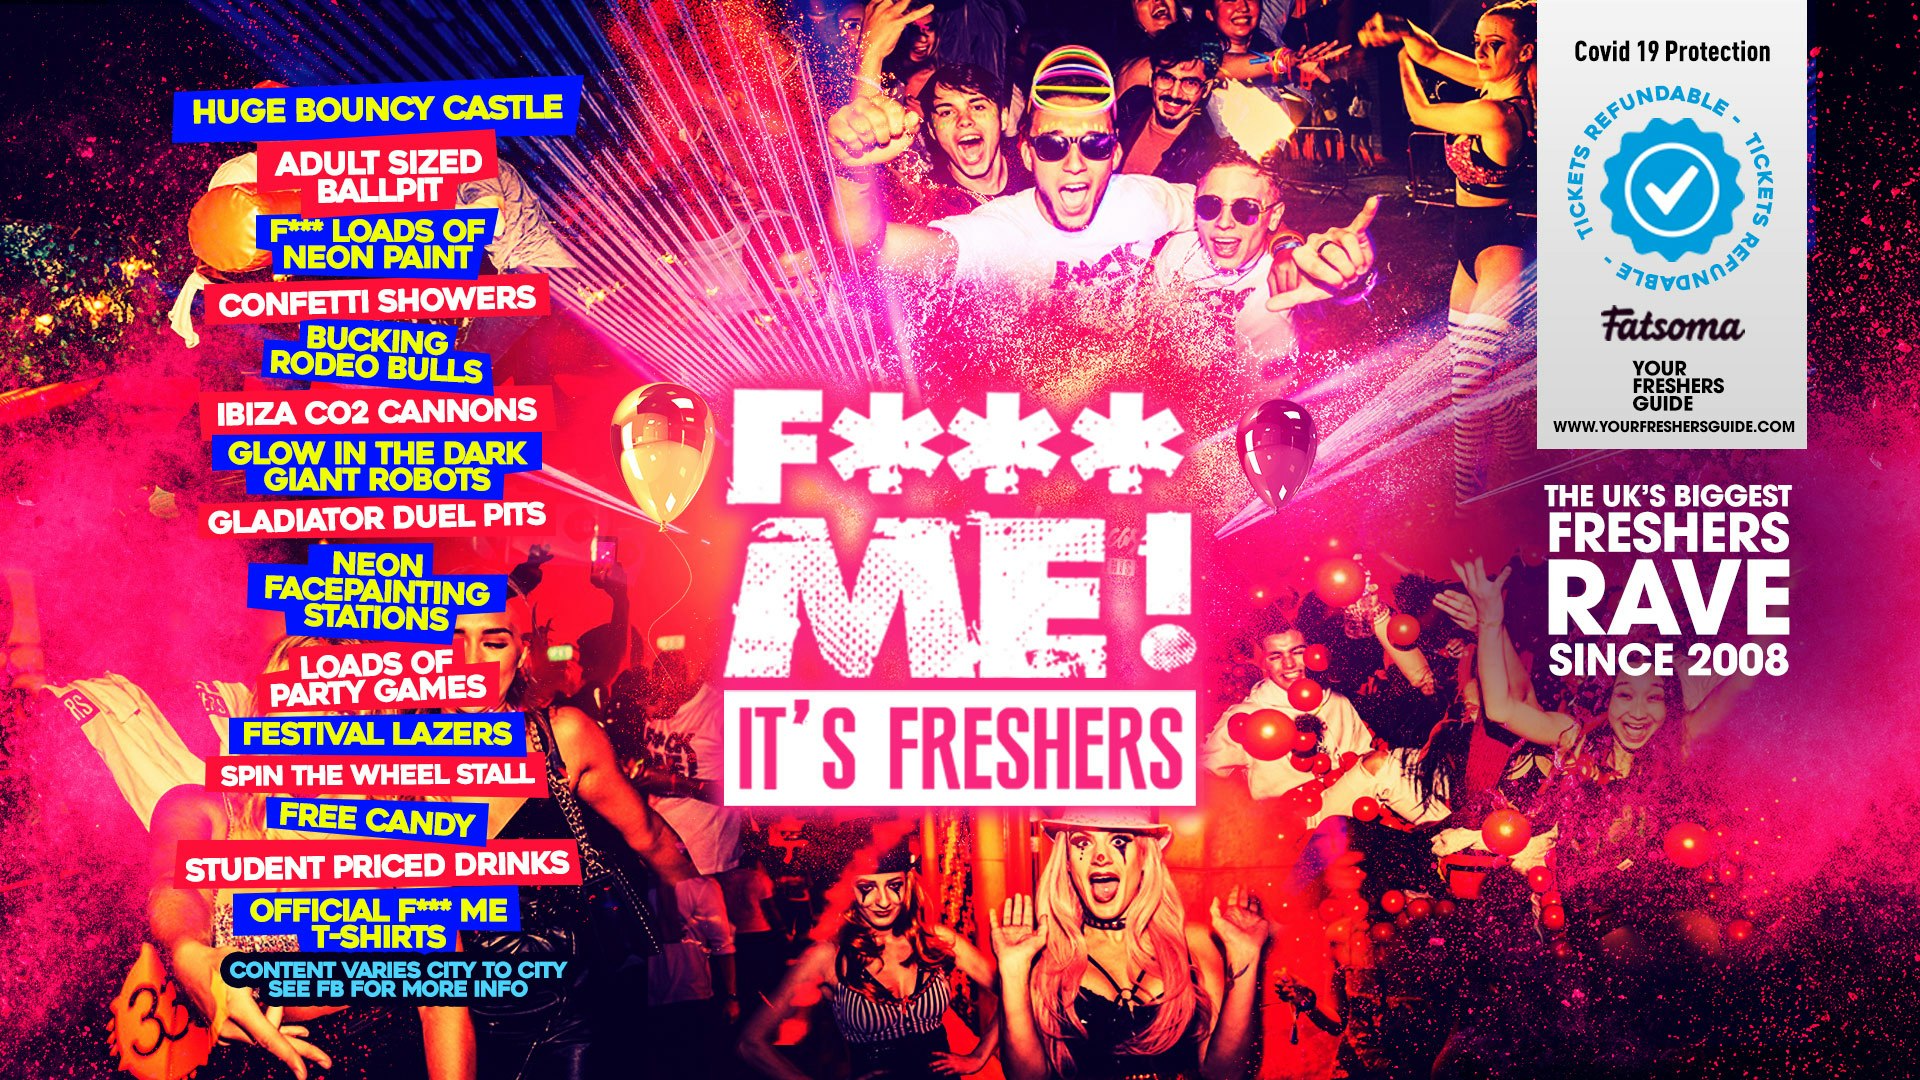 F*CK ME It’s Freshers | Brighton Freshers 2021 – Tickets SELLING FAST!